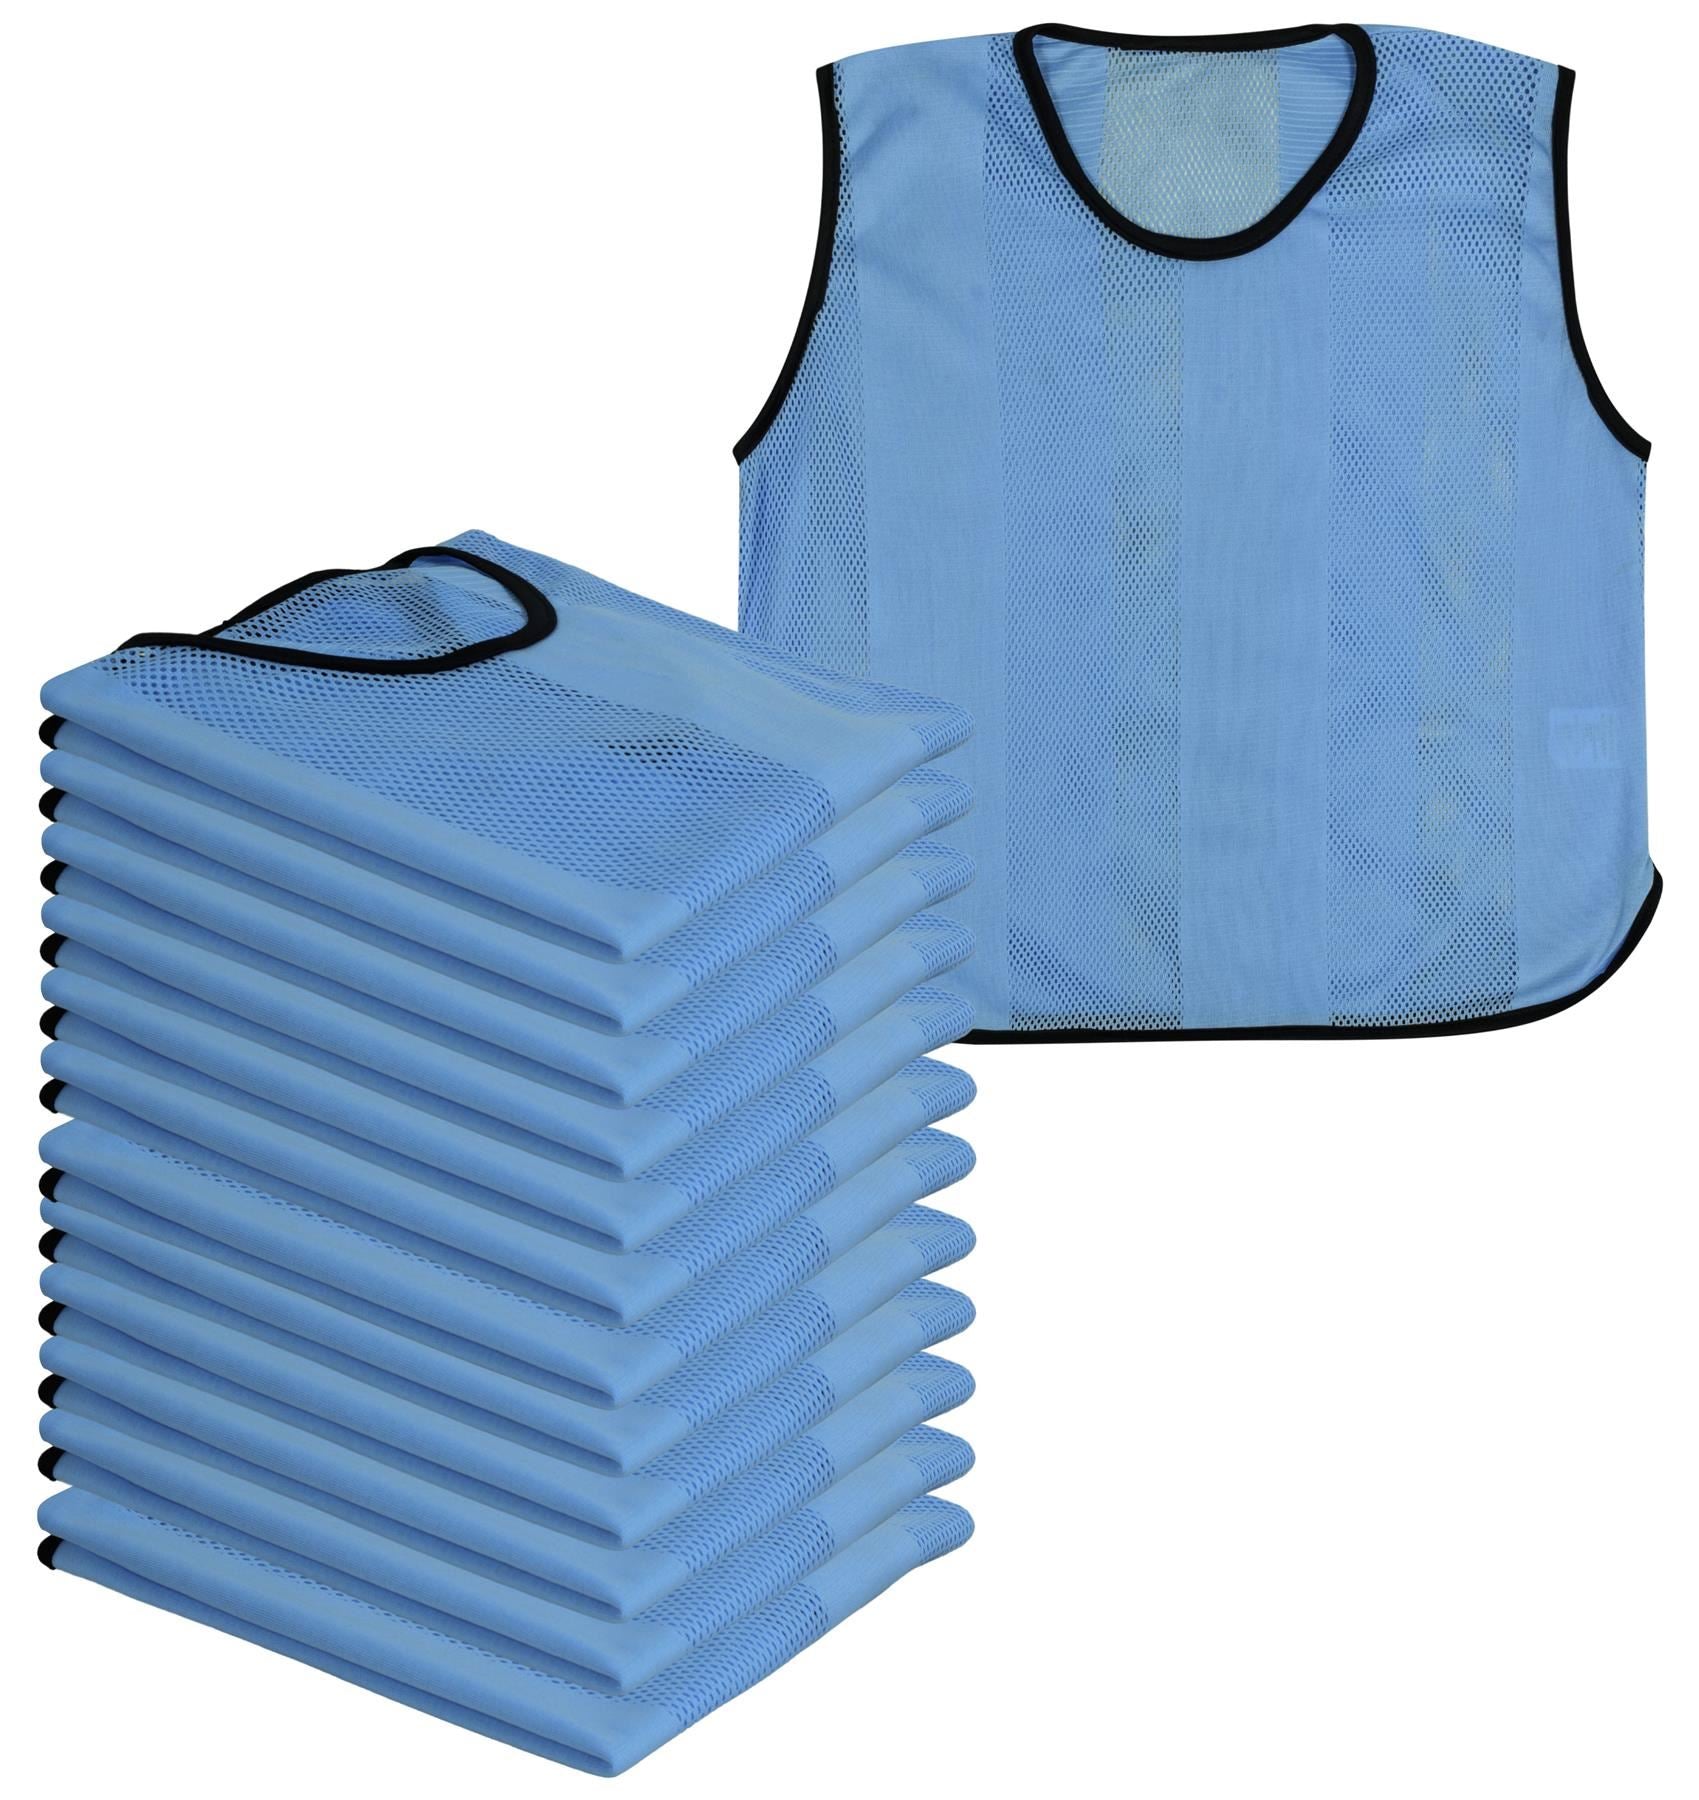 A2Z 12 Pack Sports Mesh Bibs Comfortable During Football Rugby Sports Kids/Adult